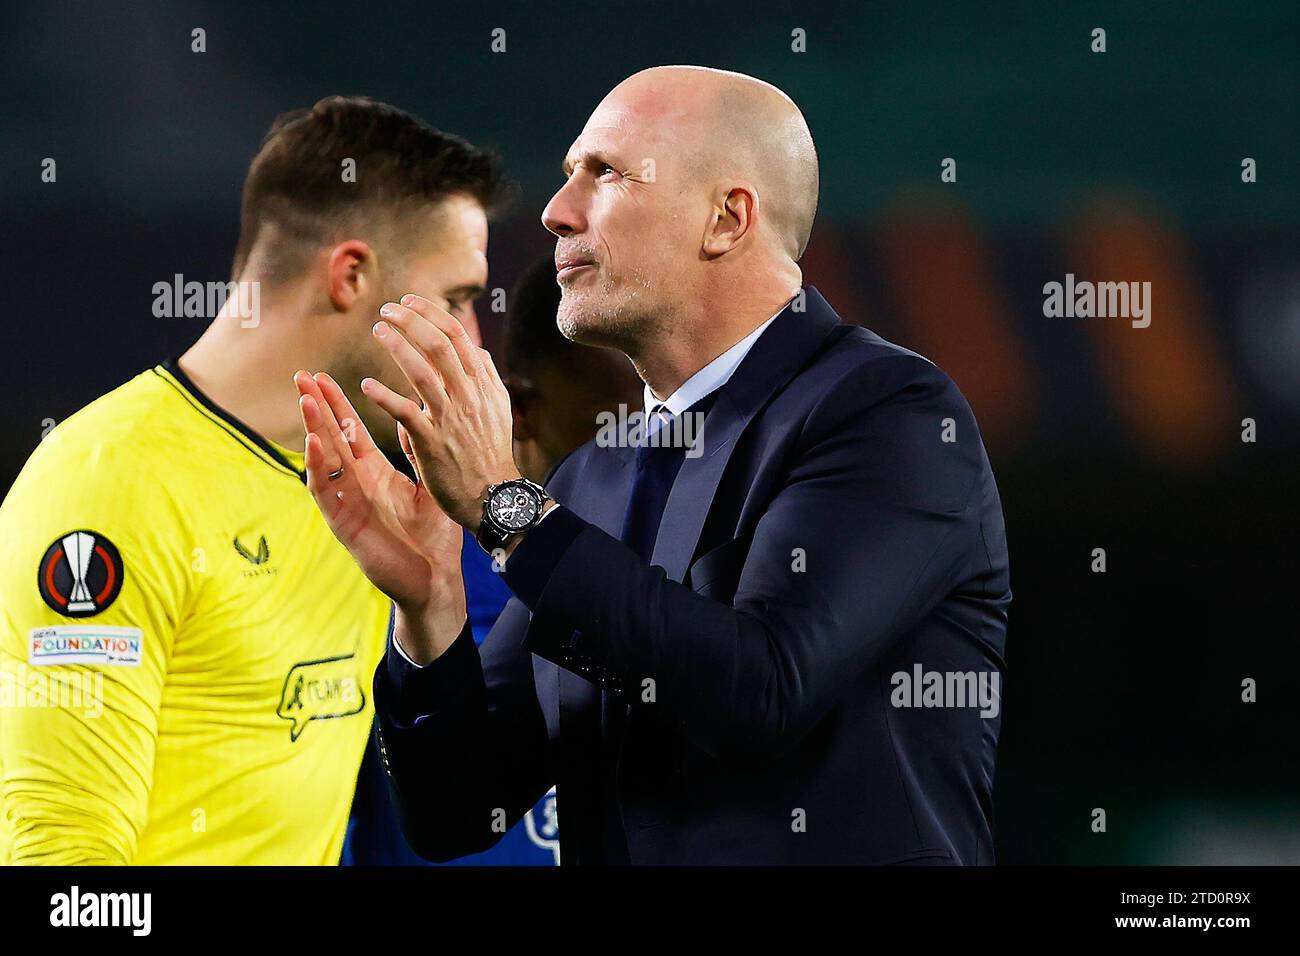 Seville, Spain. 14th December 2023. Head coach Philippe Clement of Rangers seen after the UEFA Europa League match between Real Betis and Rangers at the Estadio Benito Villamarin in Seville. (Photo credit: Gonzales Photo - Andres Gongora). Credit: Gonzales Photo/Alamy Live News Stock Photo